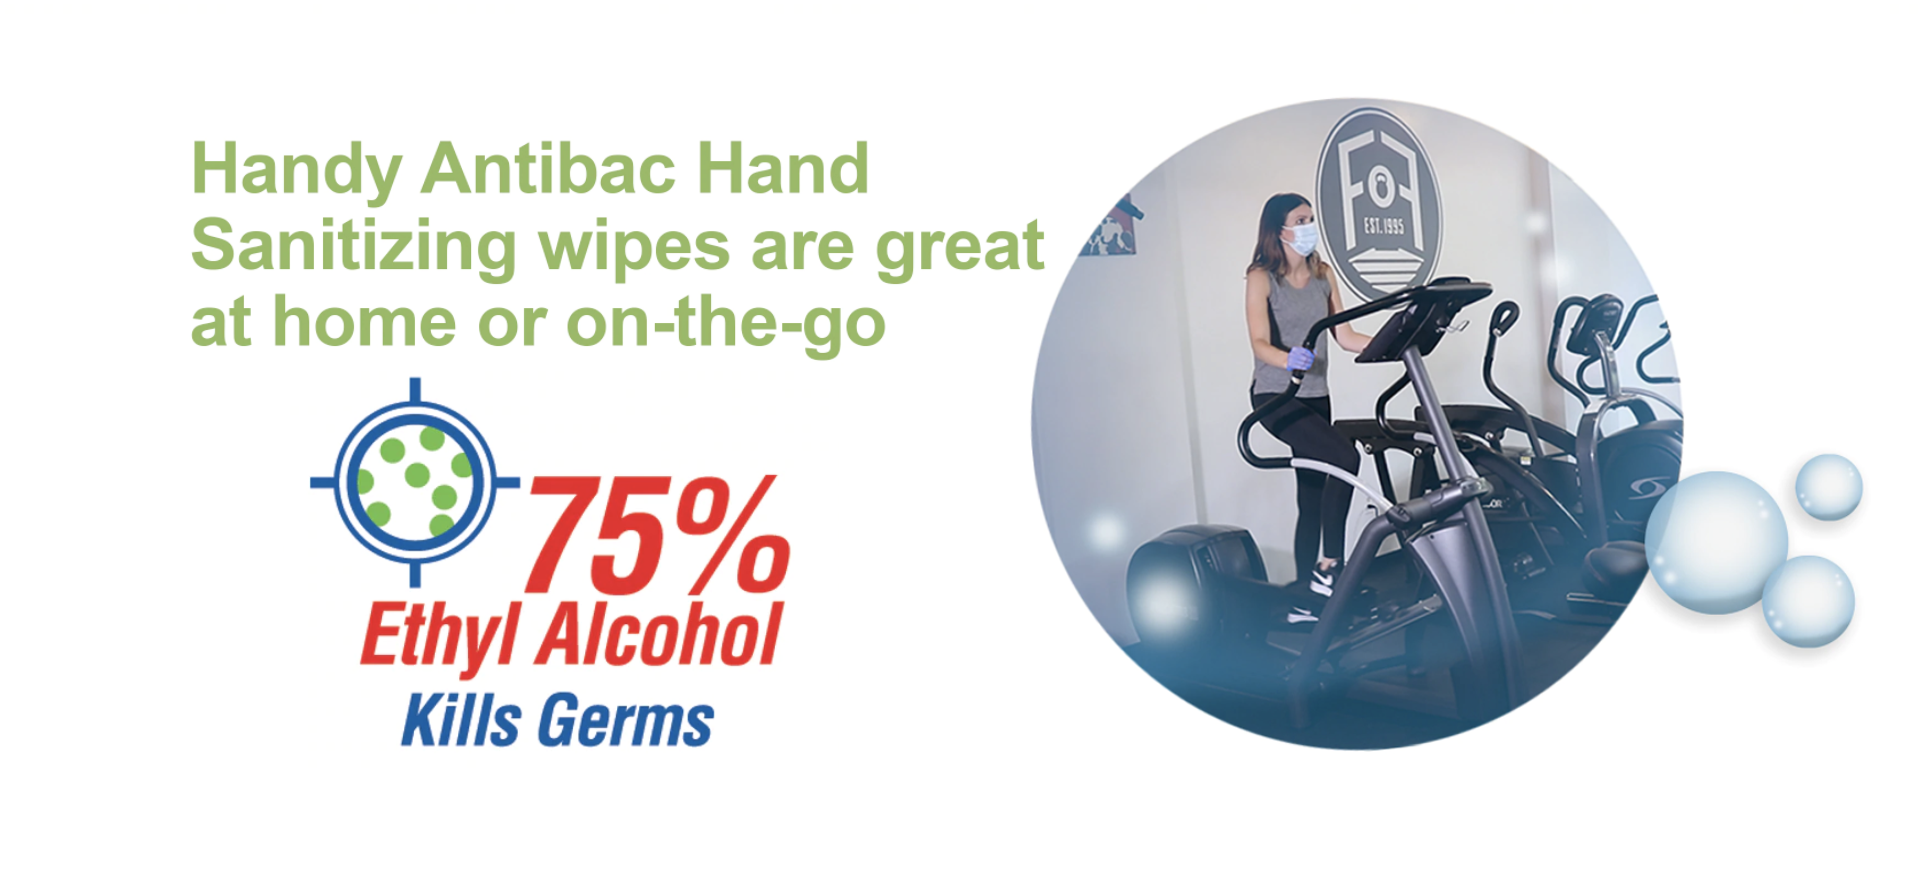 With 75% Ethyl Alcohol, Handy Antibac Hand Sanitizing Wipes are great at home or on-the-go